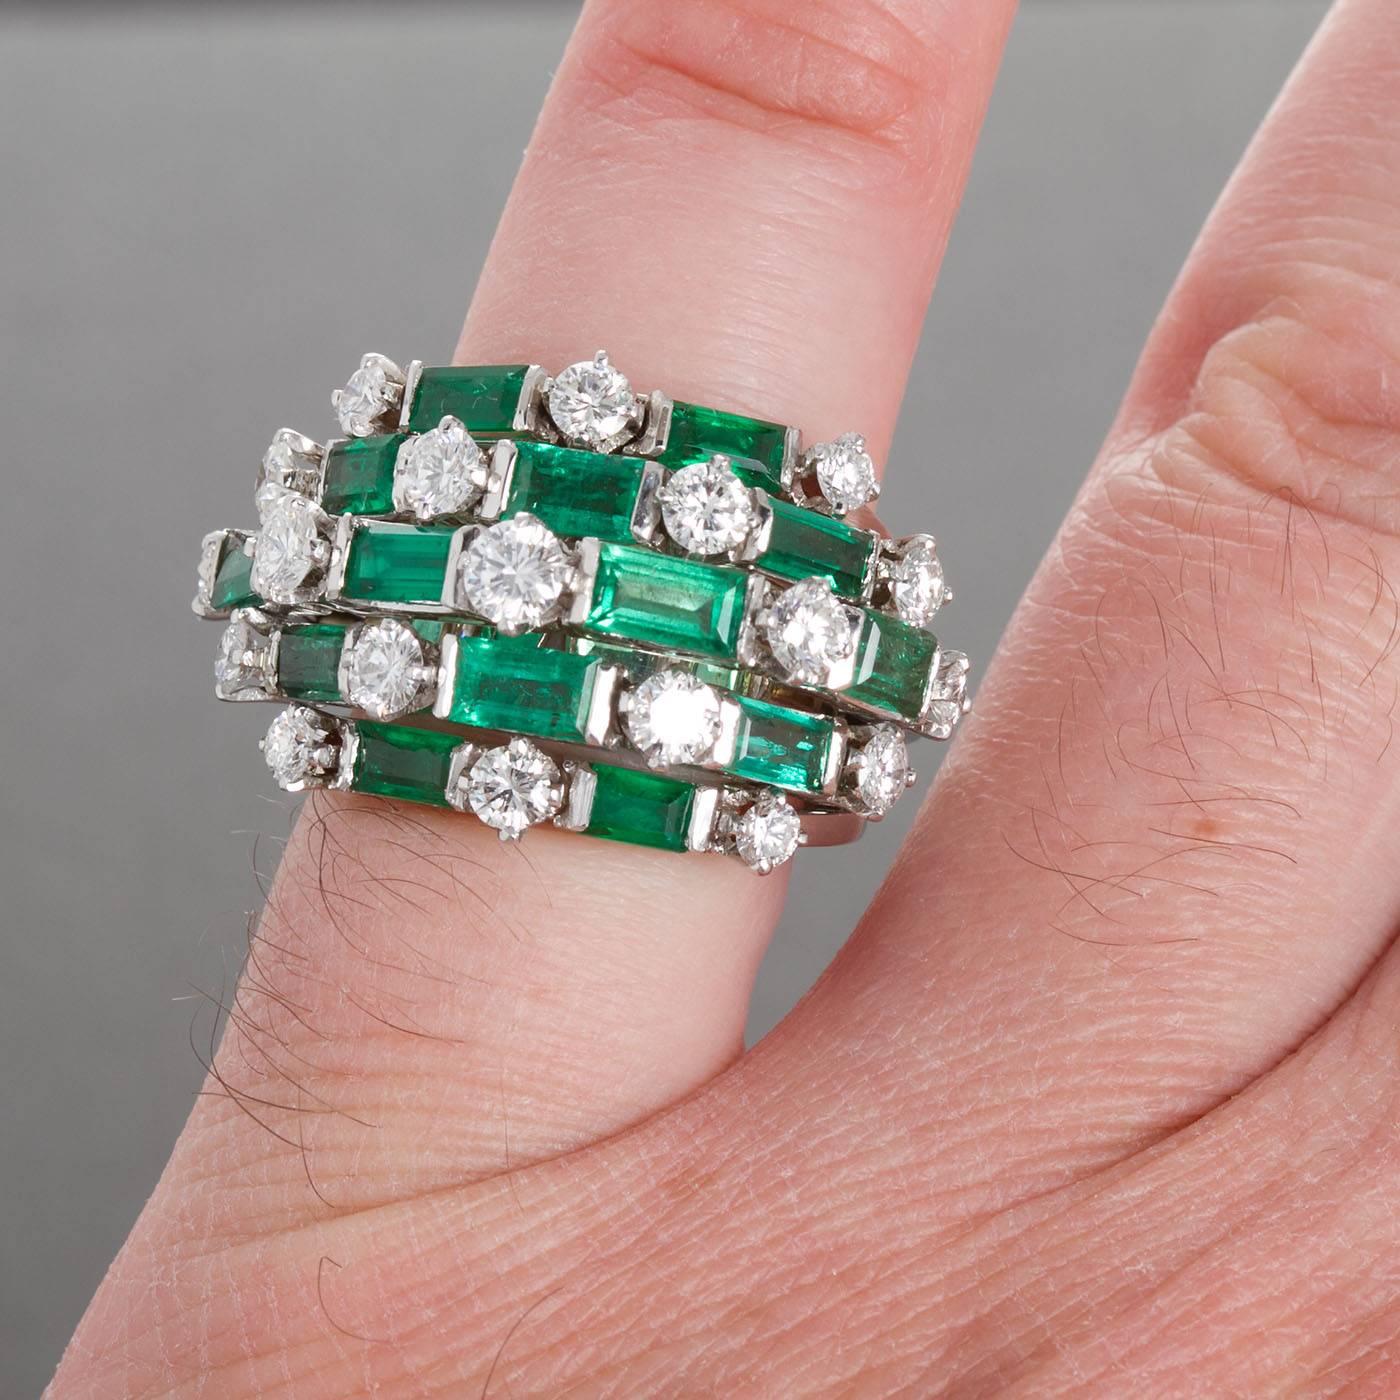 A fine diamond and emerald cocktail ring. Contains 19 round brilliant diamonds and 14 rectangular step cut emeralds set in platinum. Diamonds are ~2.30 ctw.  Emeralds are ~3.50 ctw. Currently size 5-1/2 US and complimentary resizing from 3.5 - 8